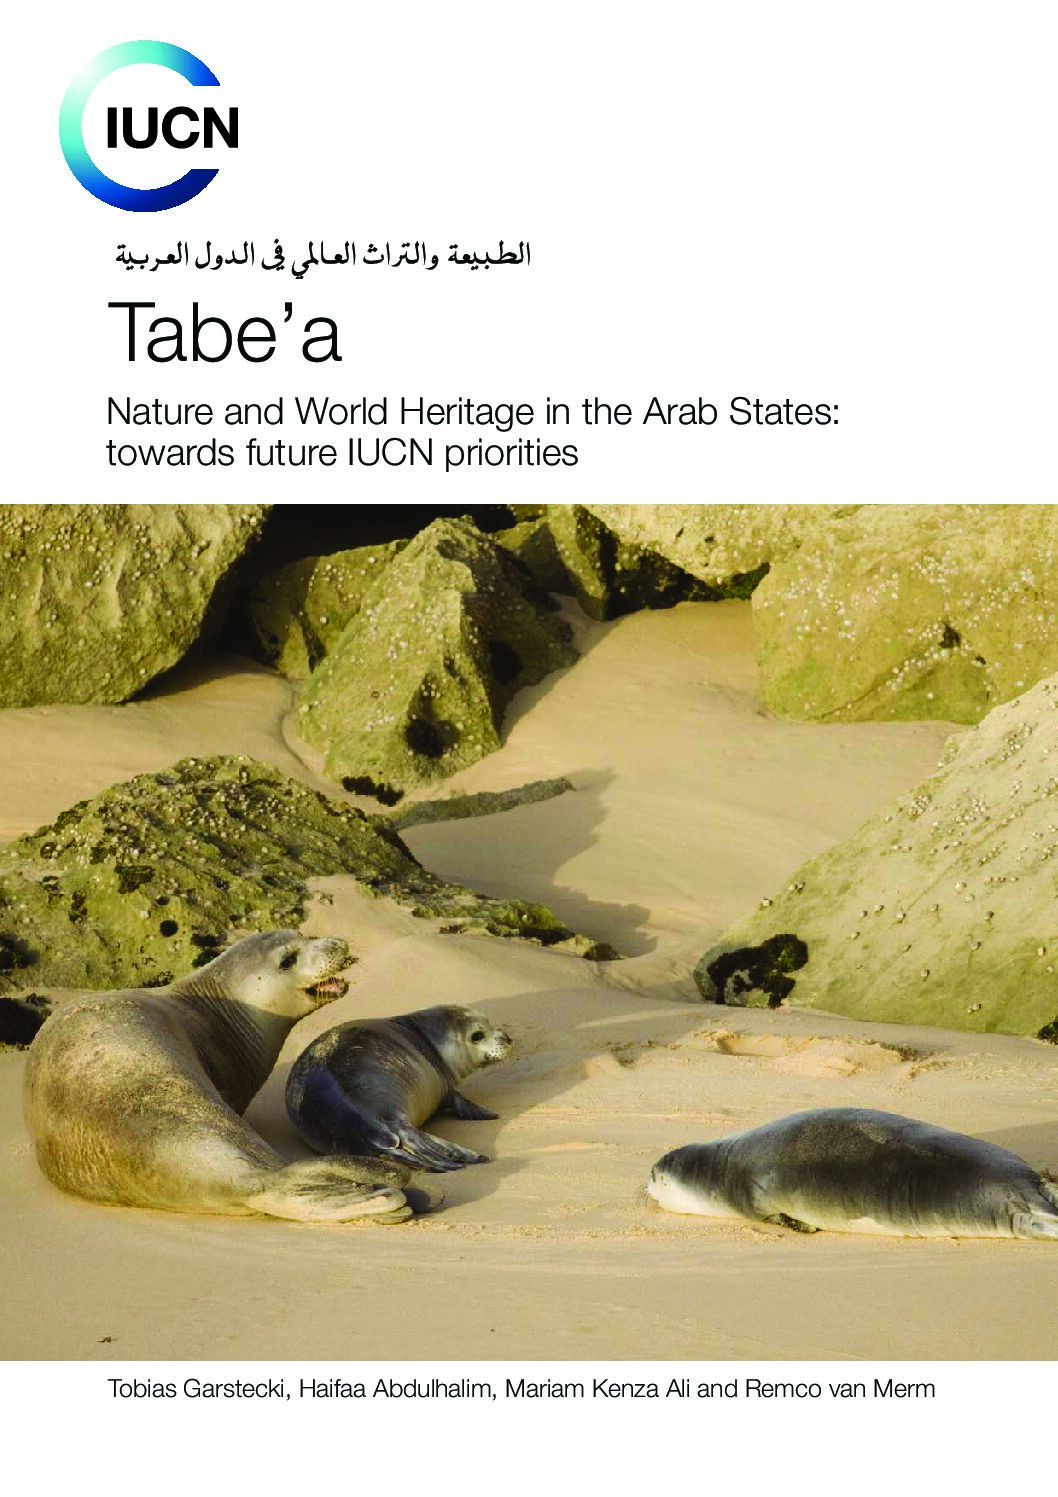 Tabe’a Nature and World Heritage in the Arab States: Towards Future IUCN priorities